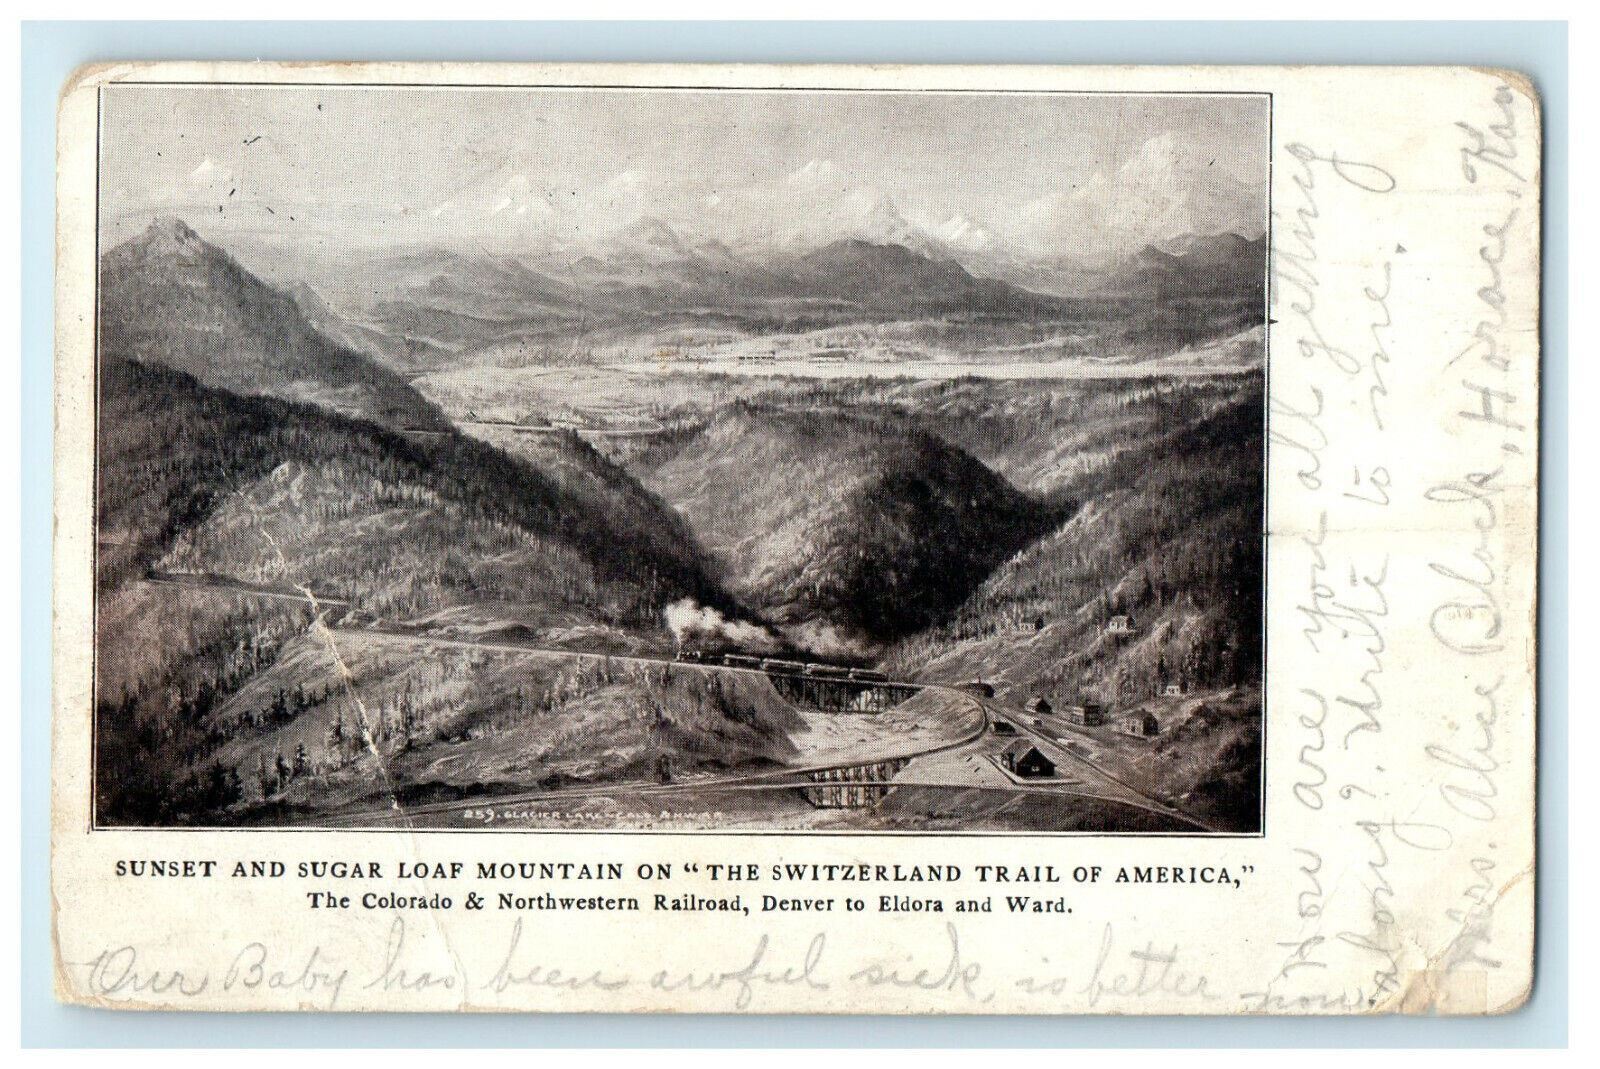 1908 Sunset and Sugar Loaf Mountain, Switzerland Trail, Colorado CO Postcard